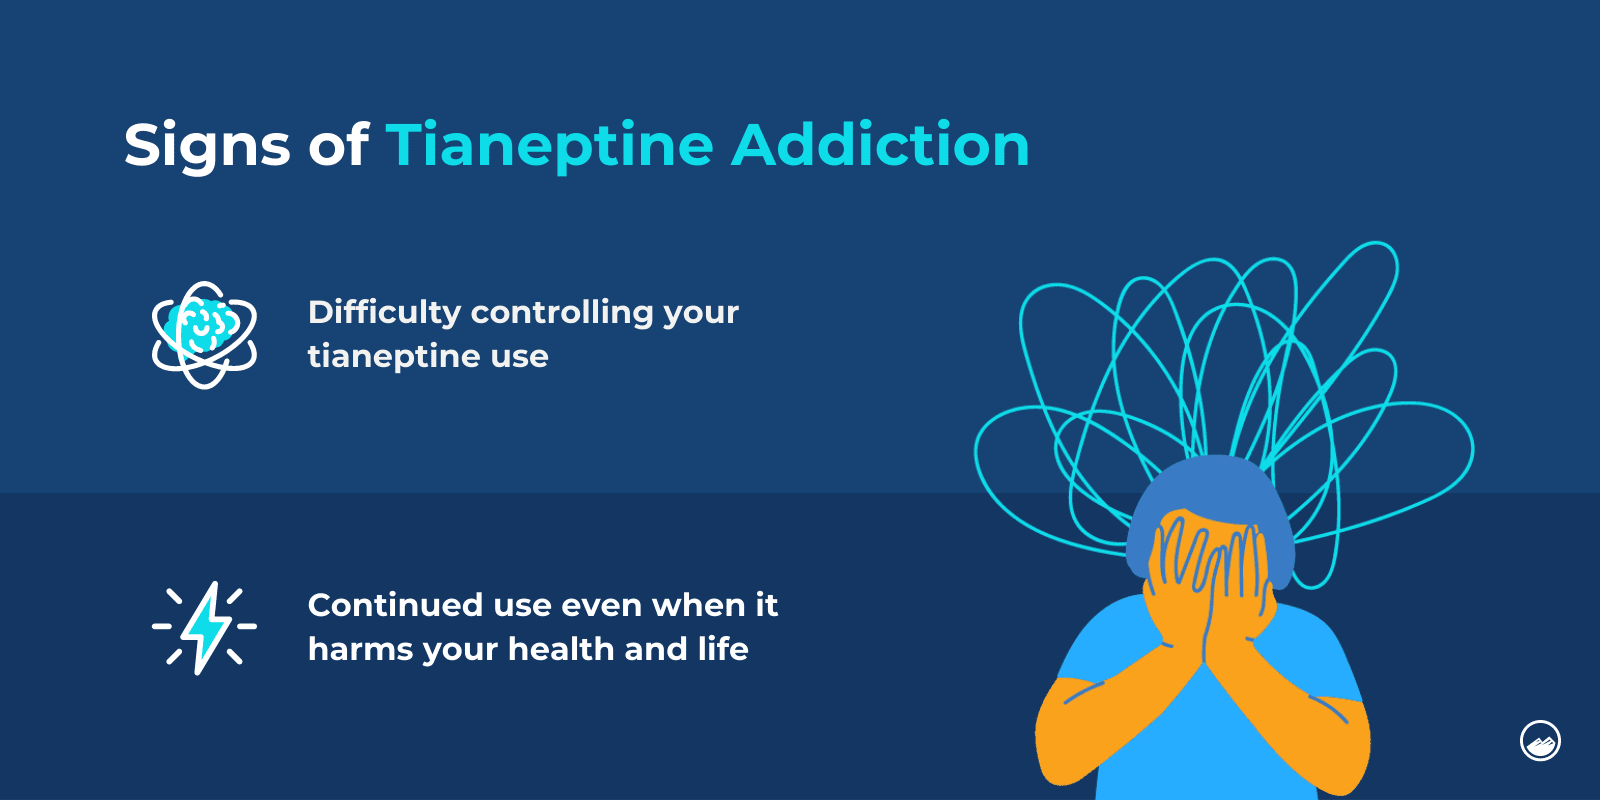 Signs of Tianeptine Addiction Infographic